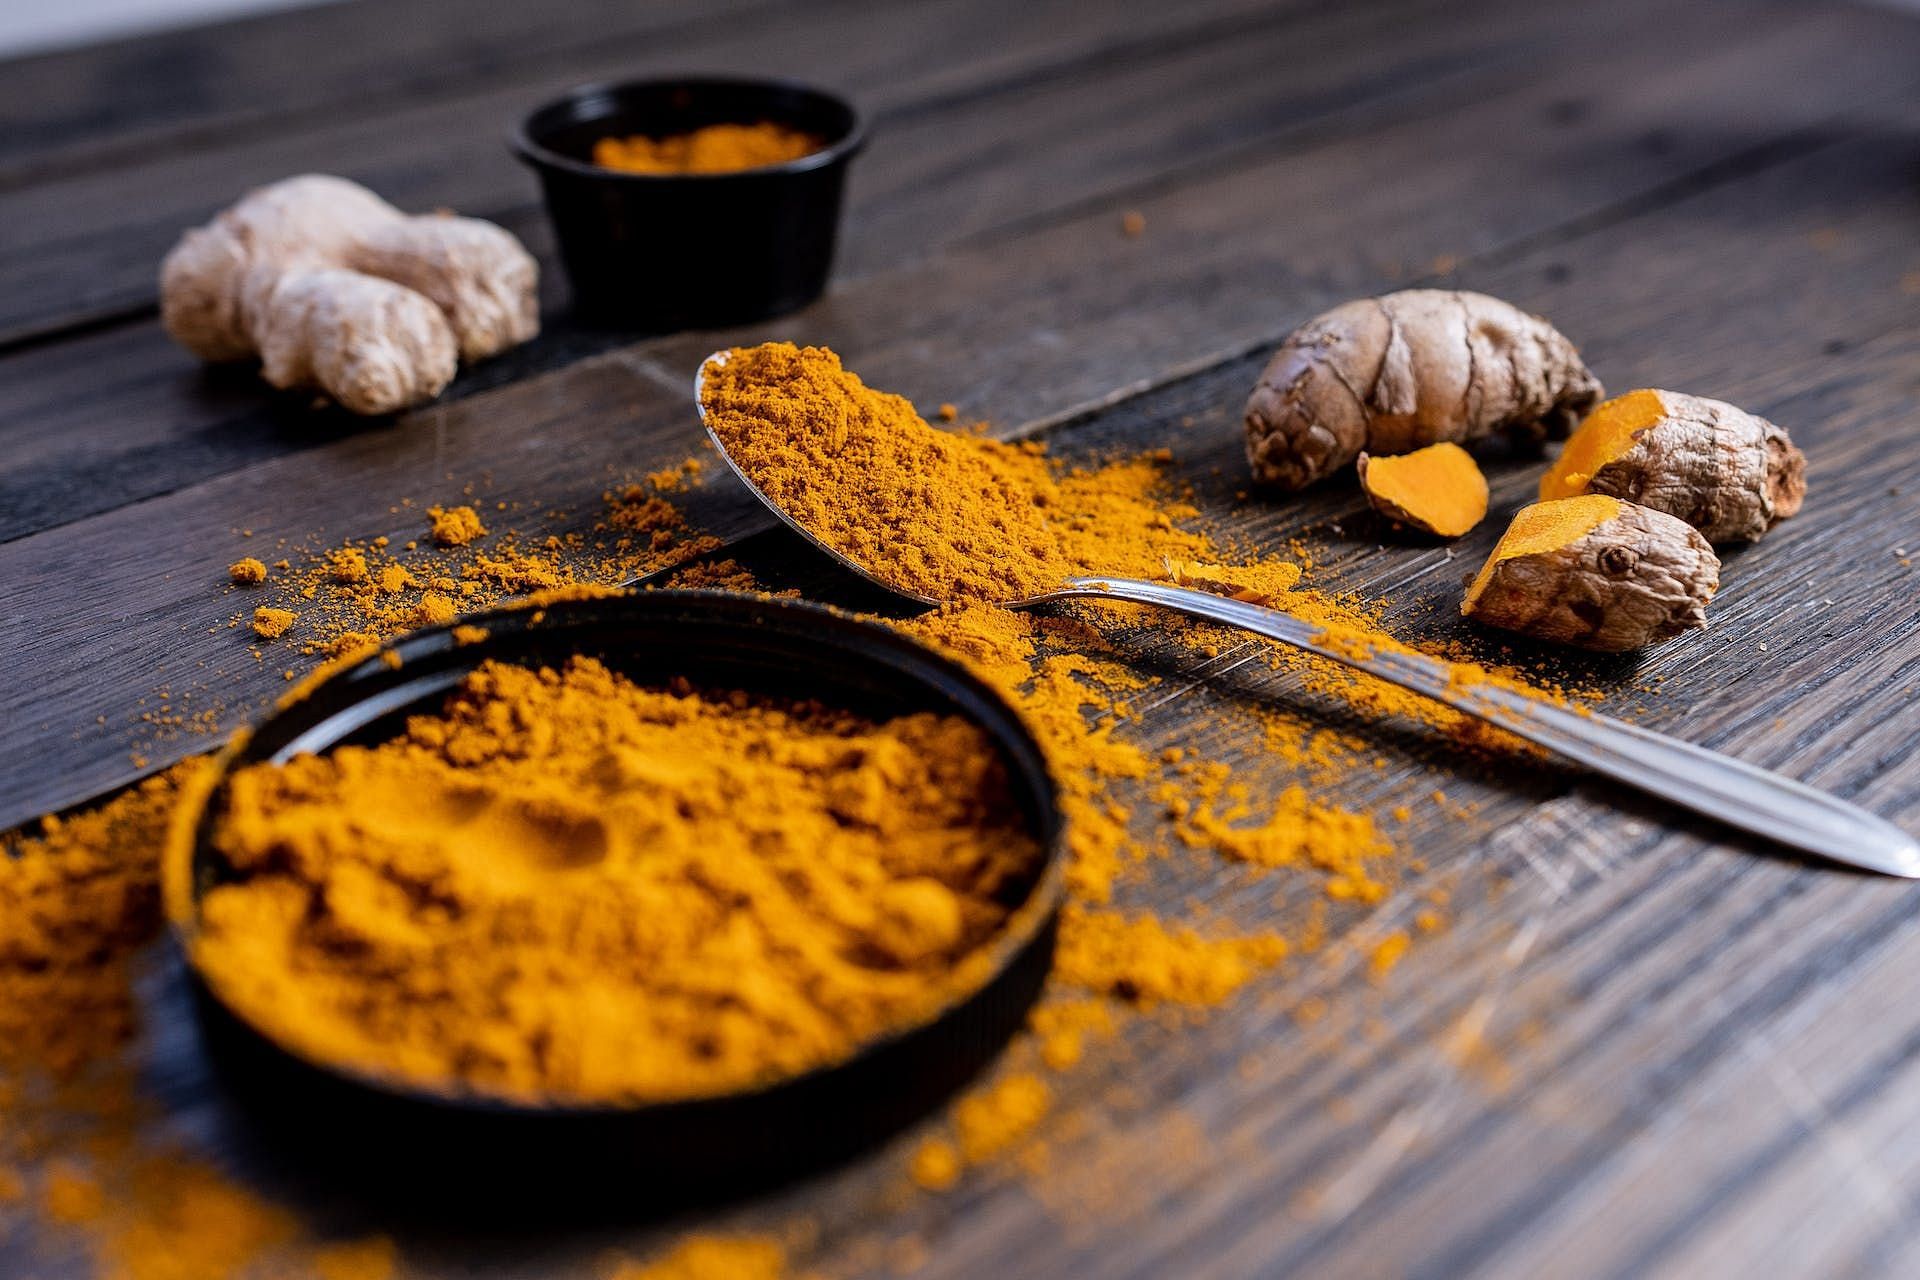 Turmeric is among the best foods for winter blues. (Image via Pexels/Karl Solano)